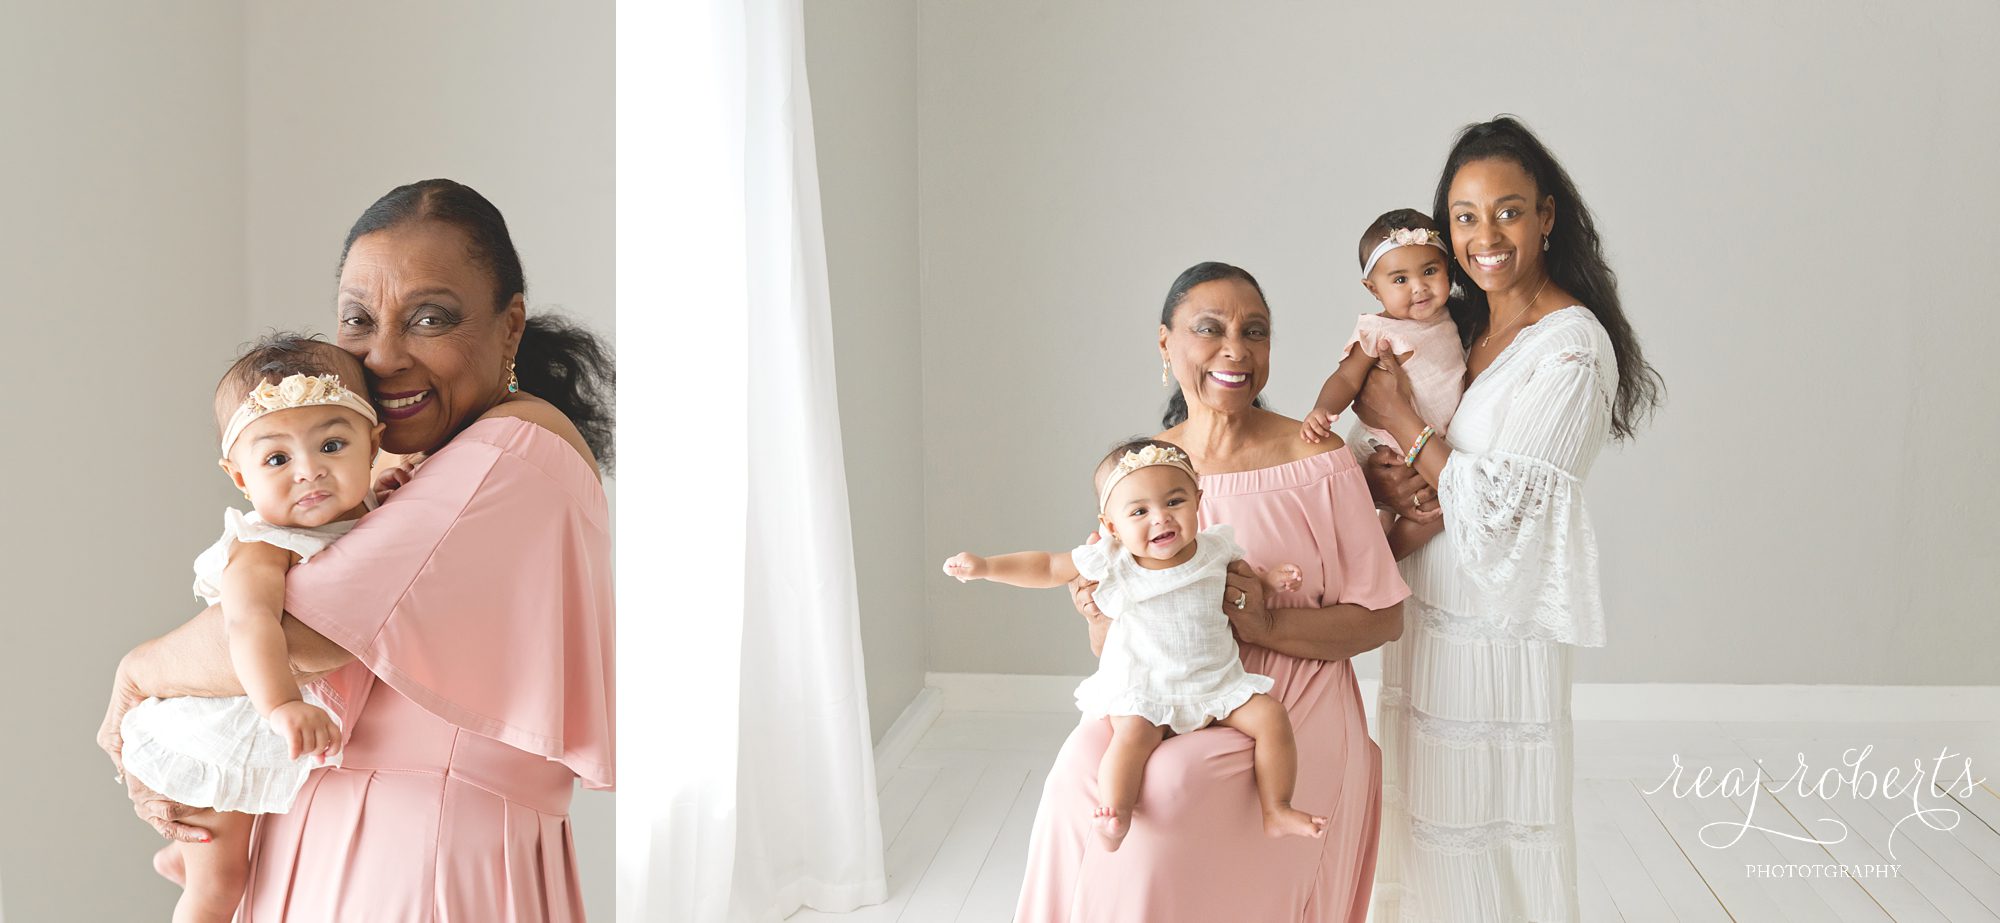 Generations photos with grandmother, mother, and daughters by Reaj Roberts Photography